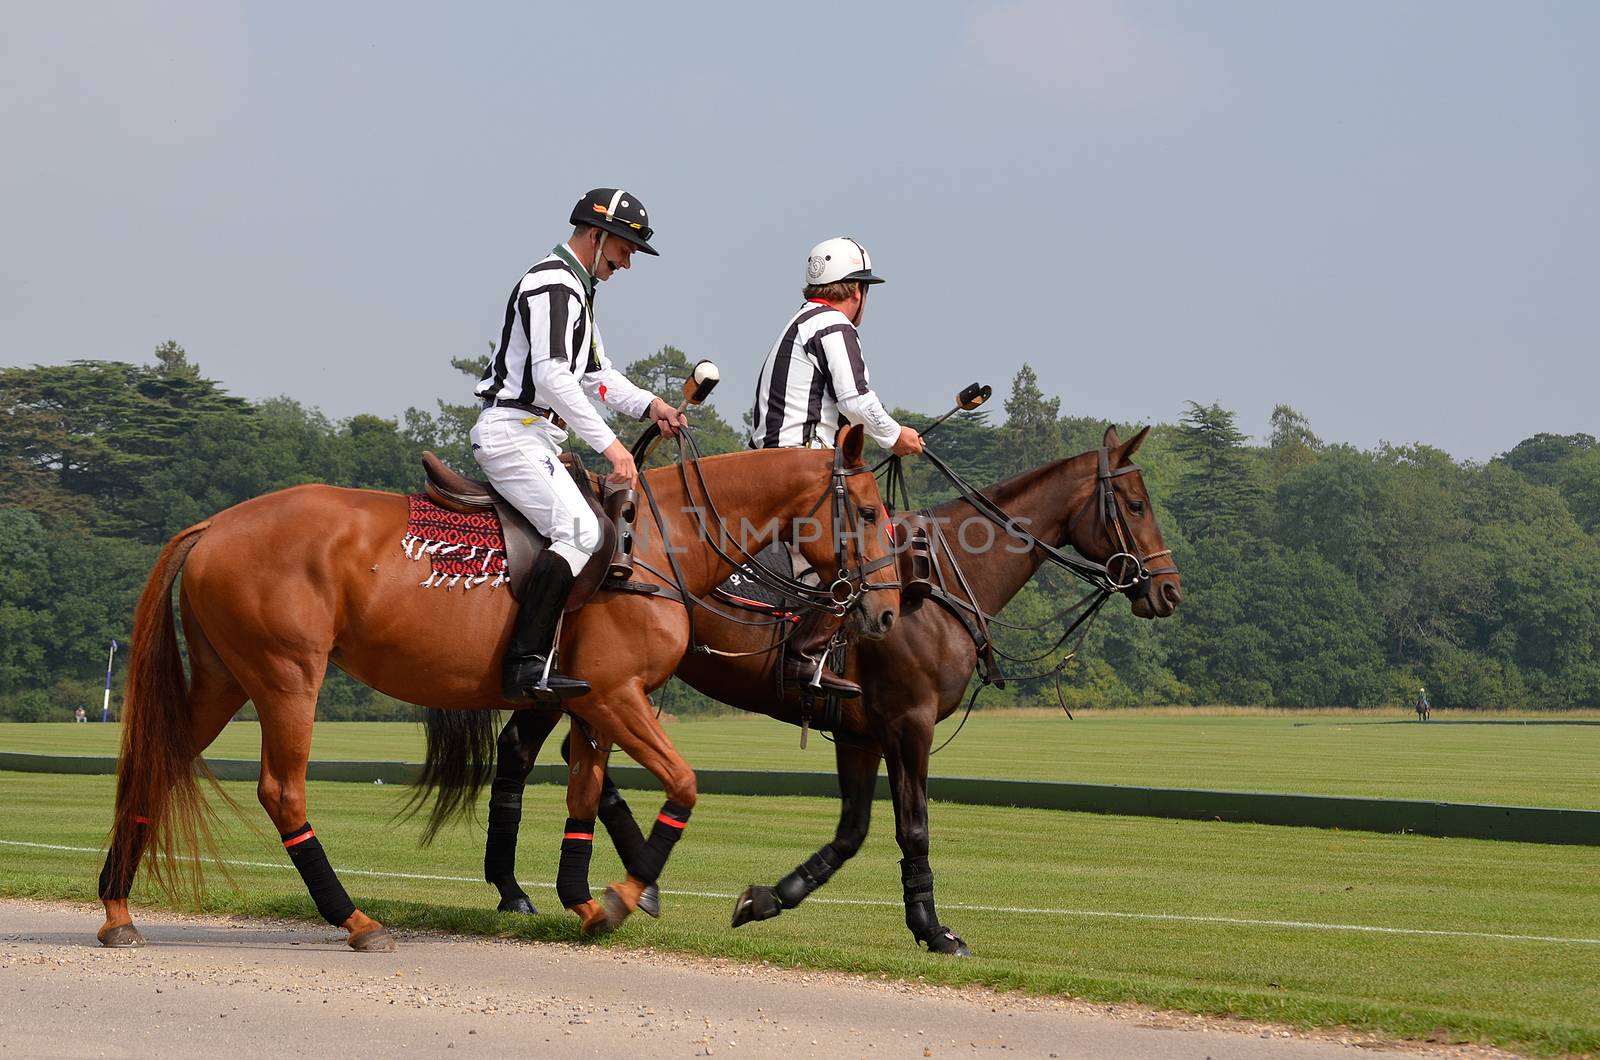 Horse polo umpires by pljvv